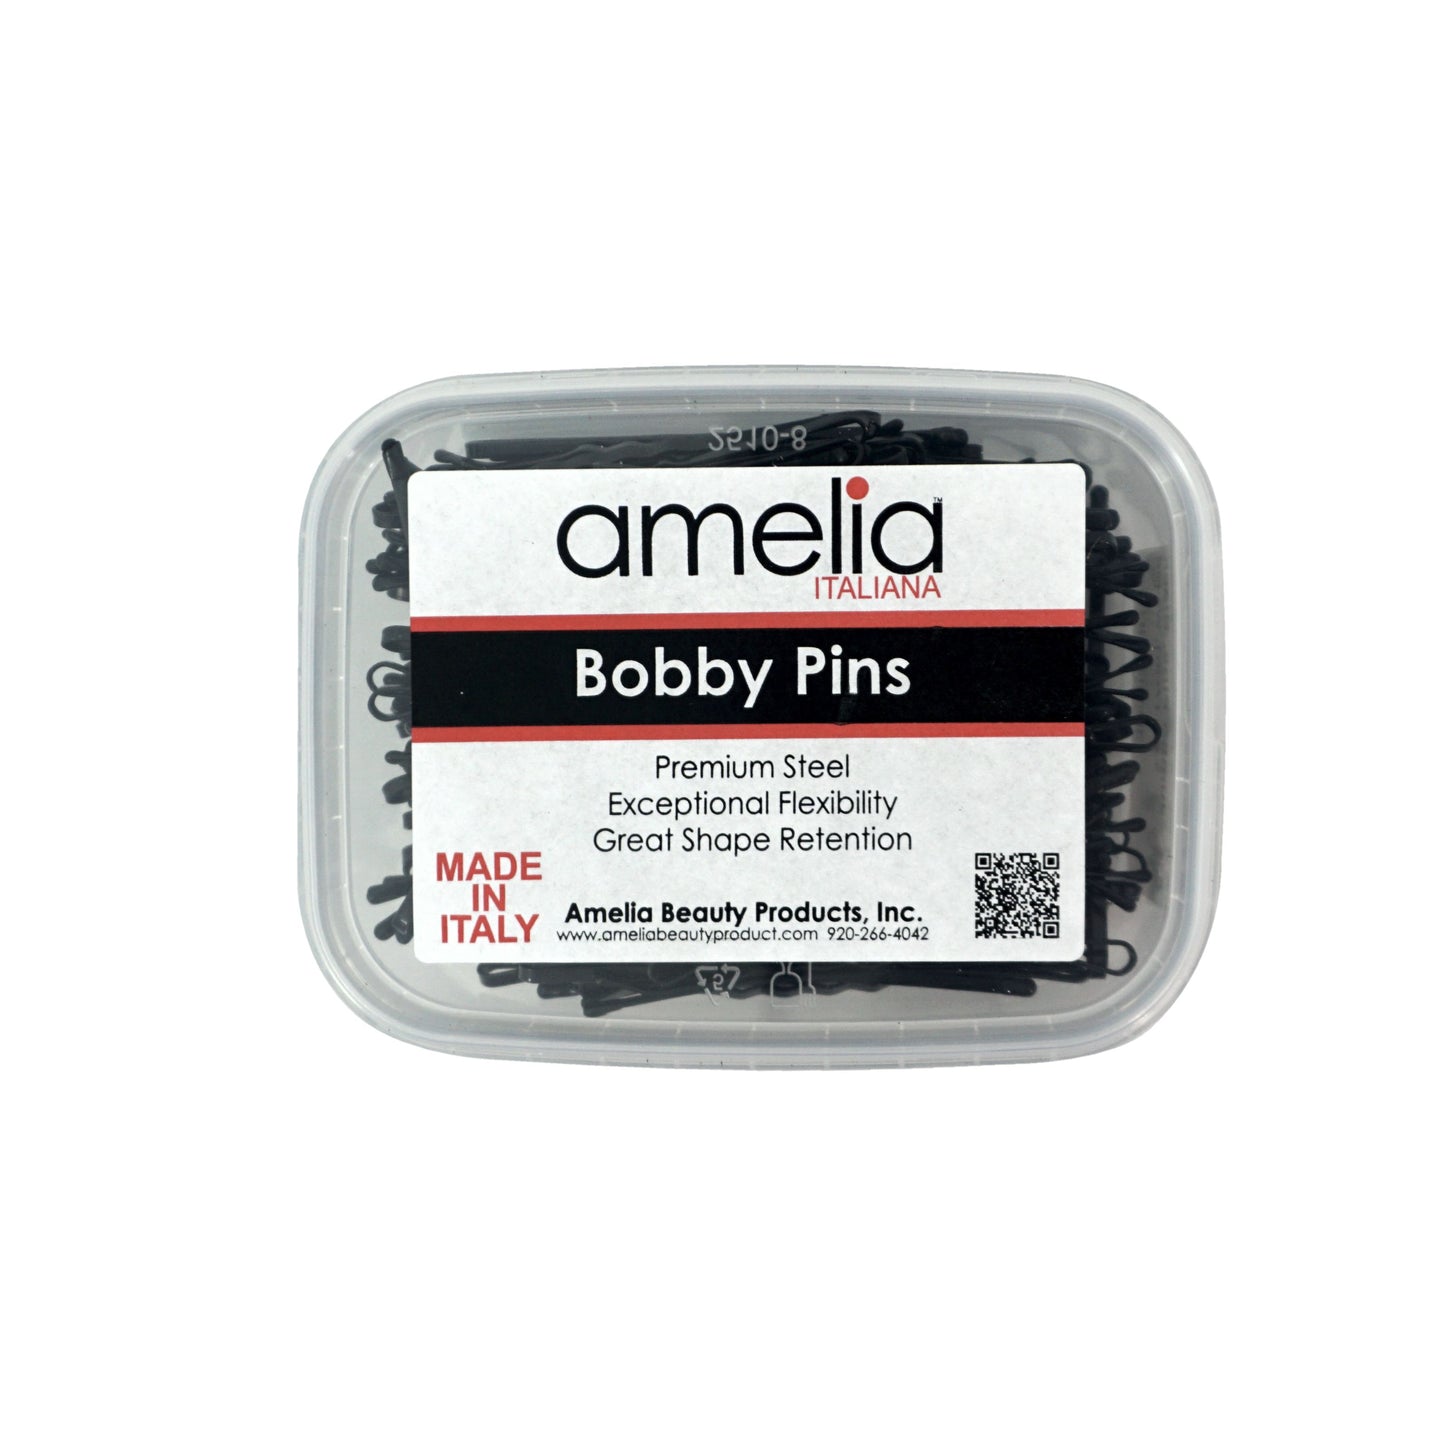 180, Black, 2.8in (7.0cm), Italian Made Jumbo Bobby Pins, Recloseable Stay Clean and Organized Container